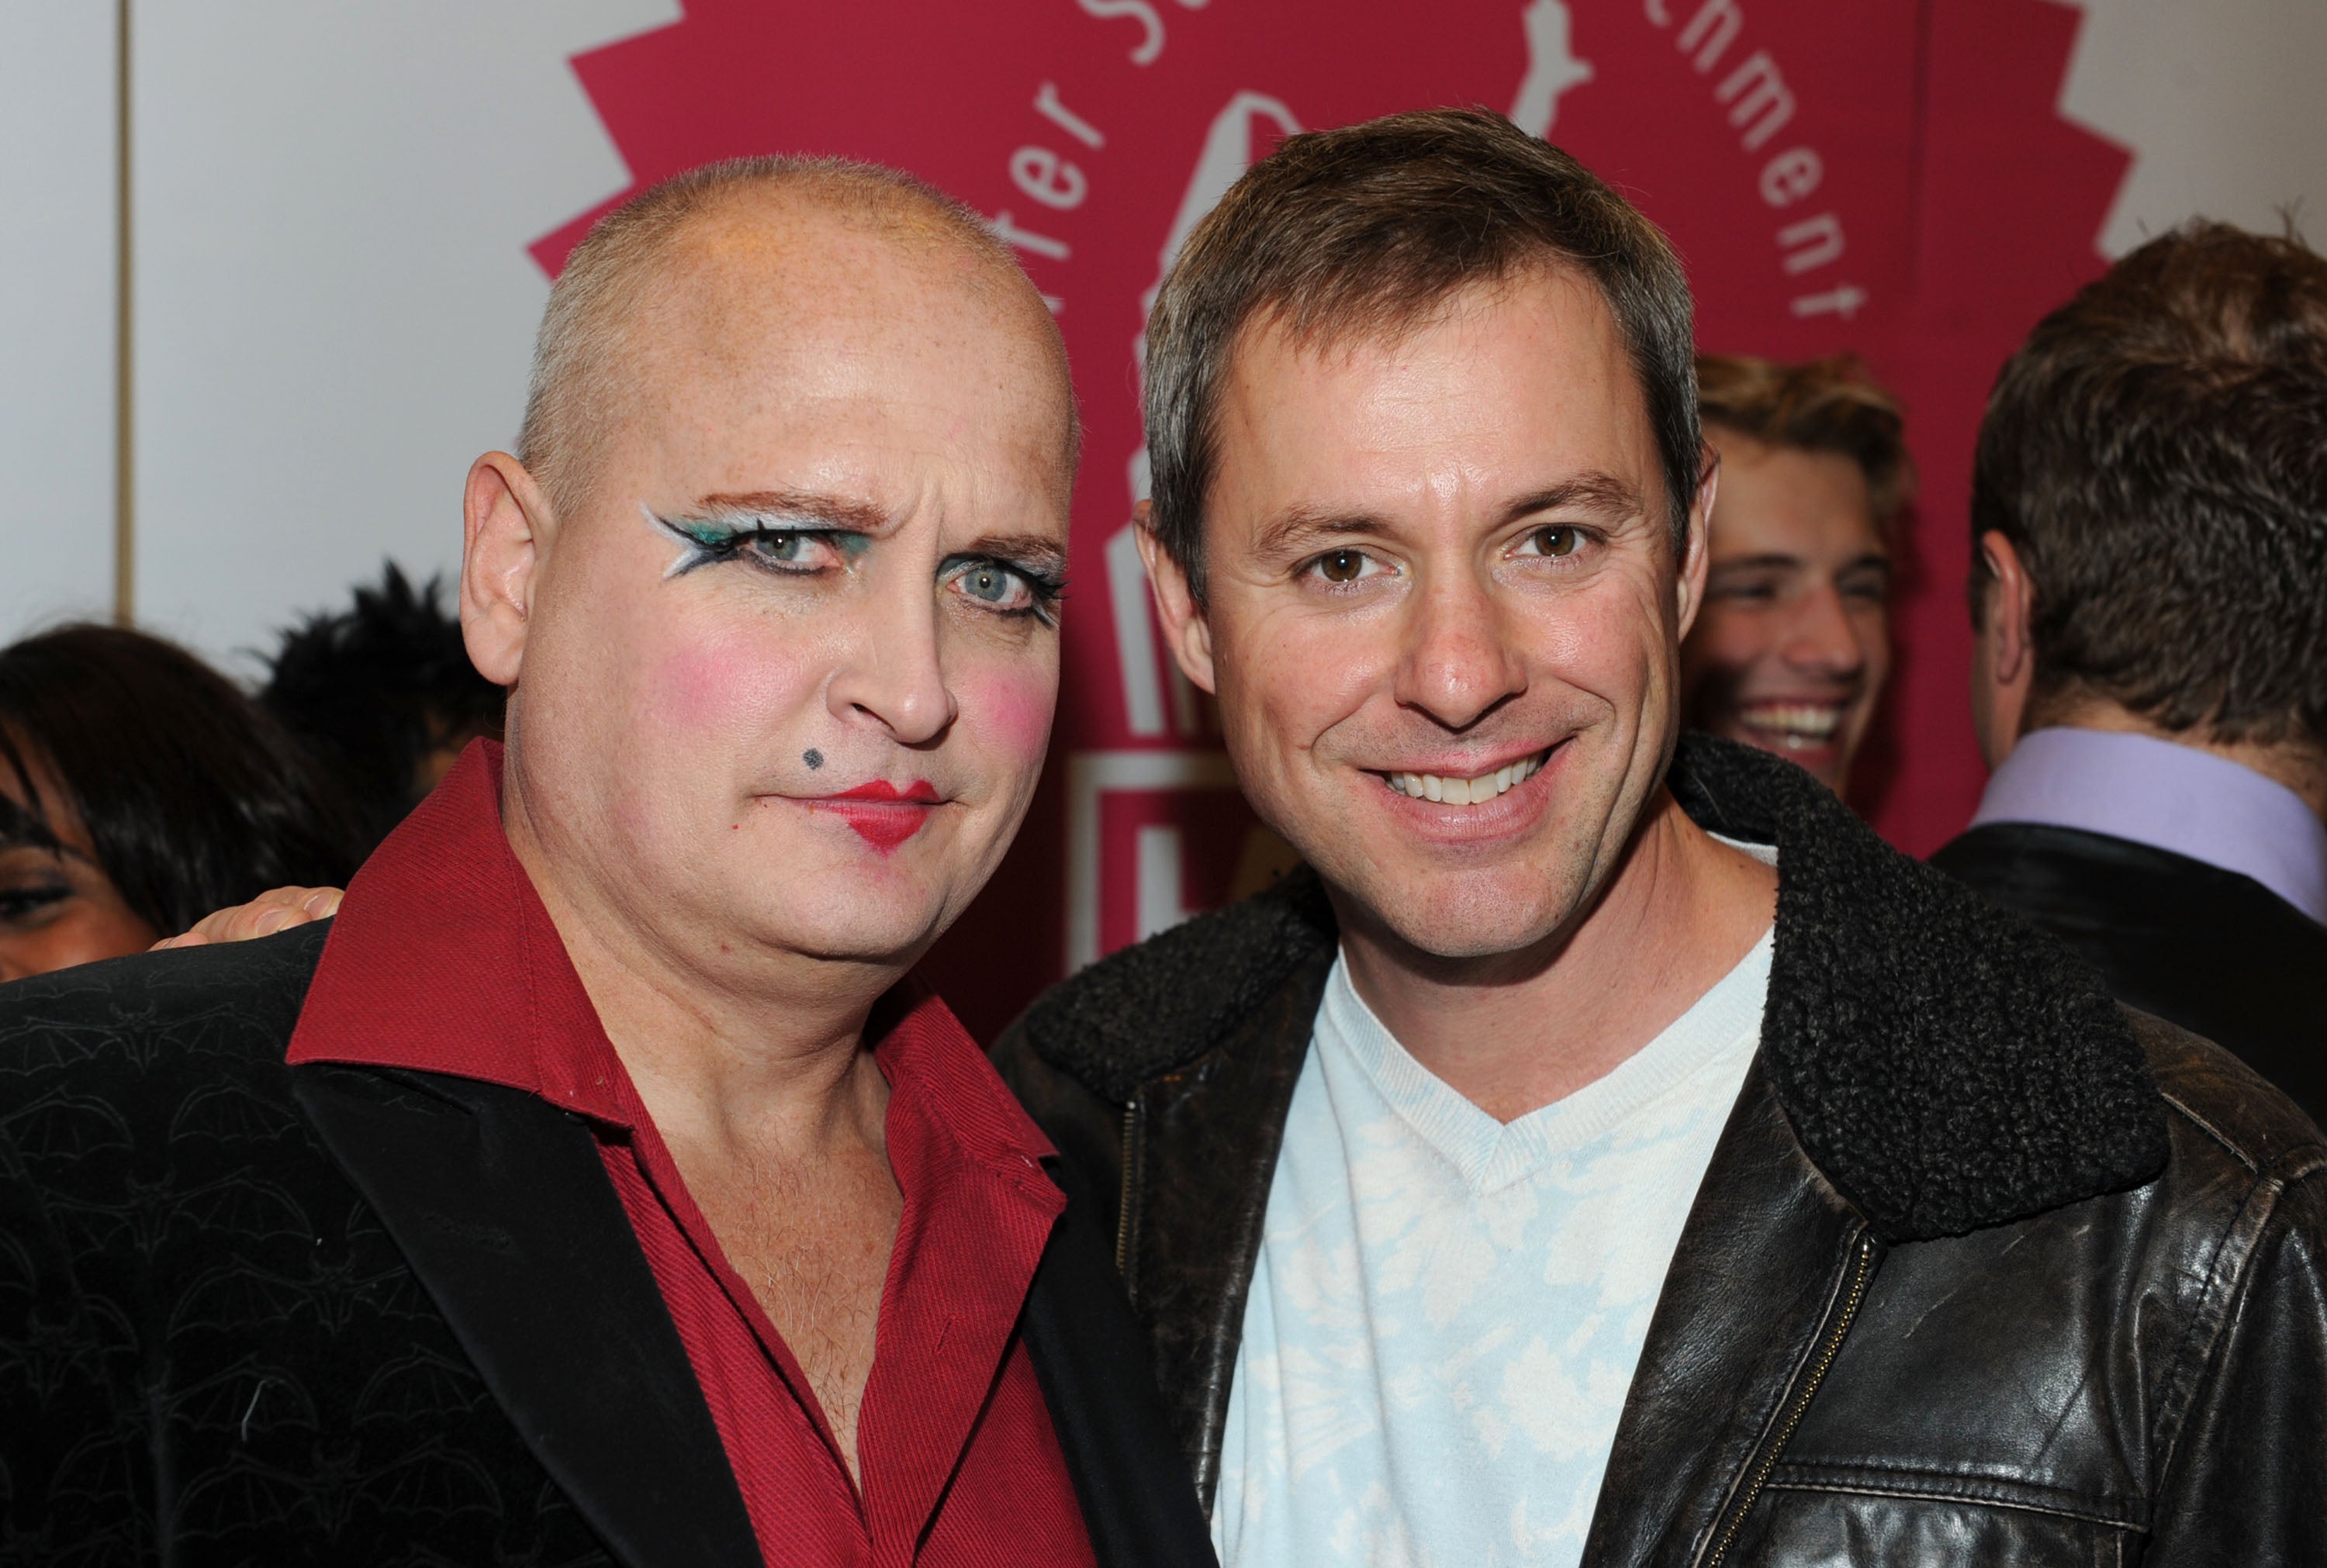 Eddie Driscoll with Mark Edgar Stephens at the opening night of ‘Cinderella’ in North Hollywood in 2010